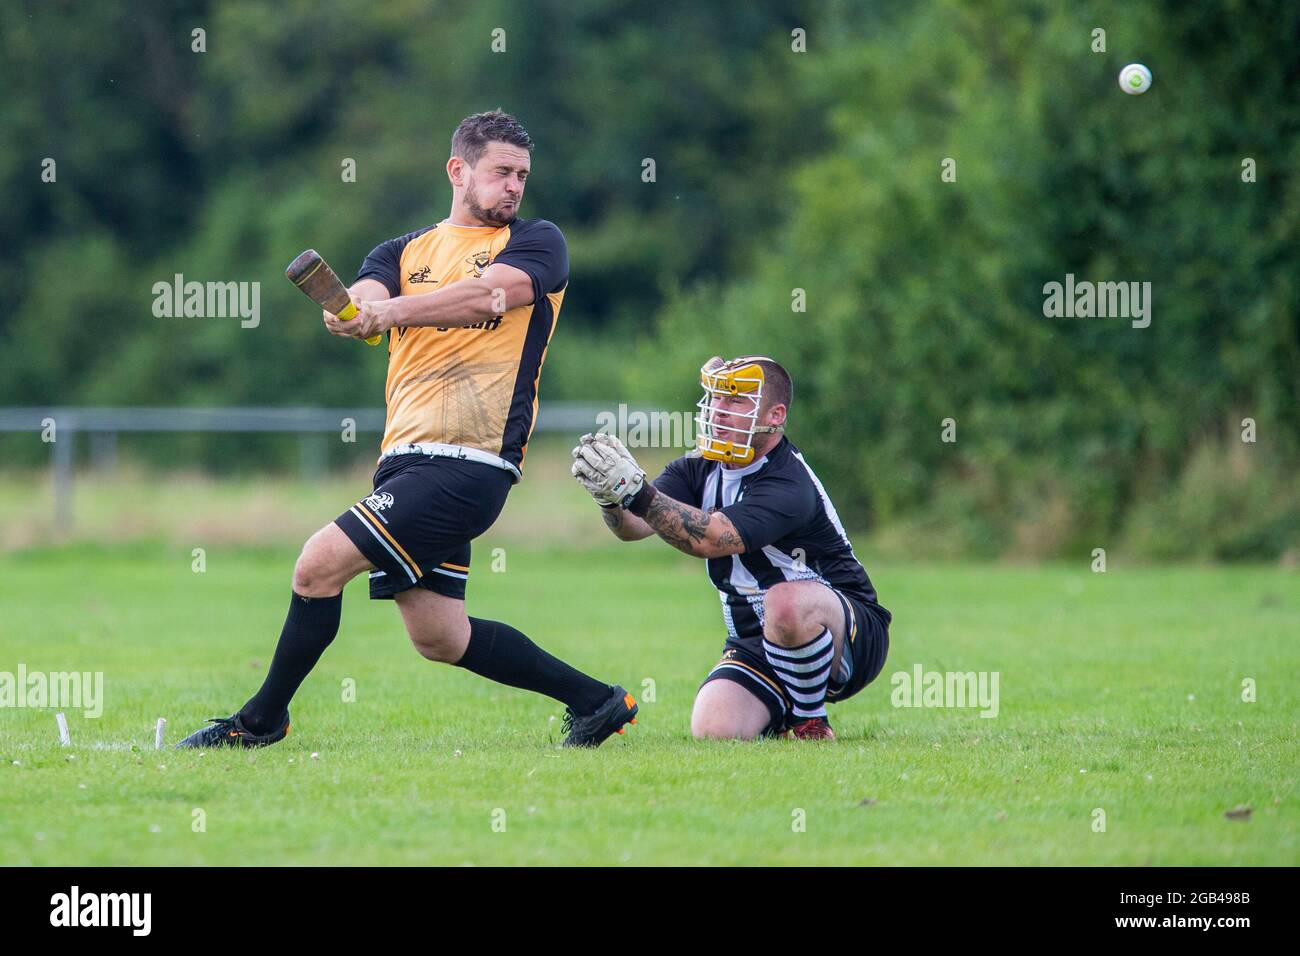 Cardiff, Wales, UK. 01st Aug, 2021. Match action during the GB Sportswear men's baseball cup final between Newport City and Grange Albion at Rumney Rugby Club. Credit: Mark Hawkins/Alamy Live News Stock Photo